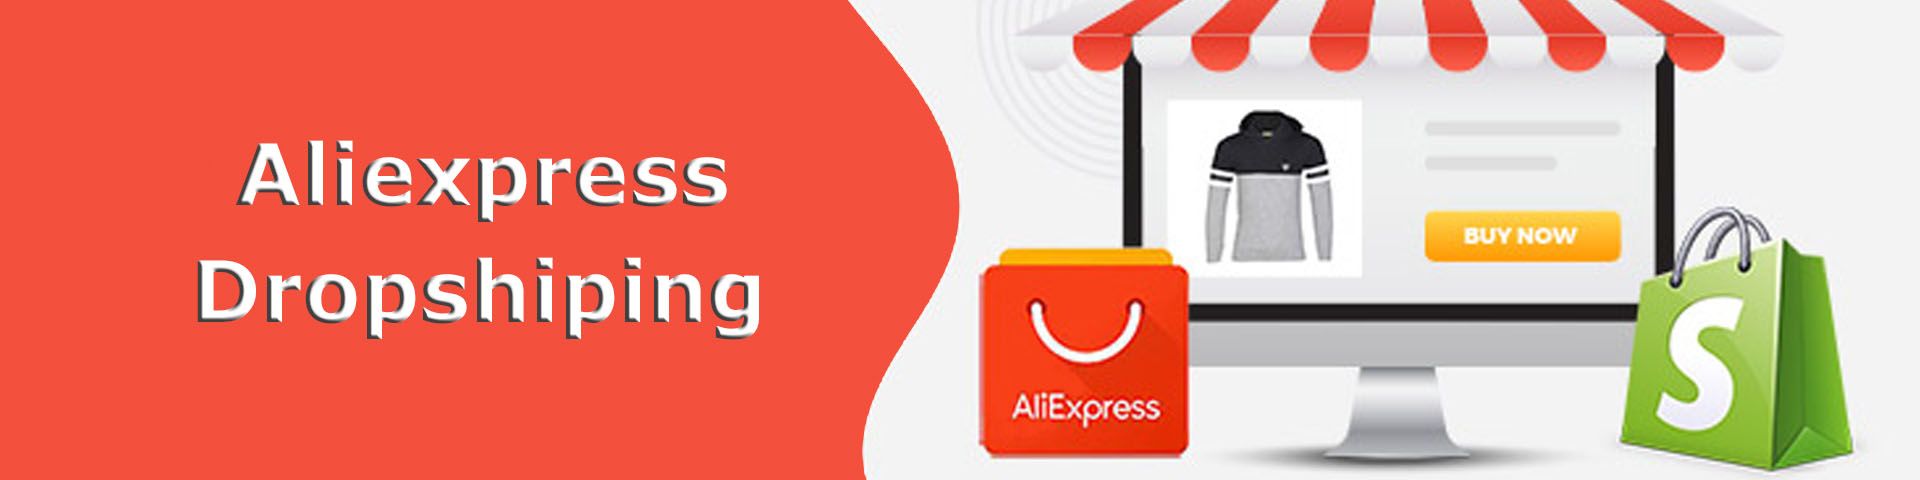 aliexpress drop shipping | oneclick online service